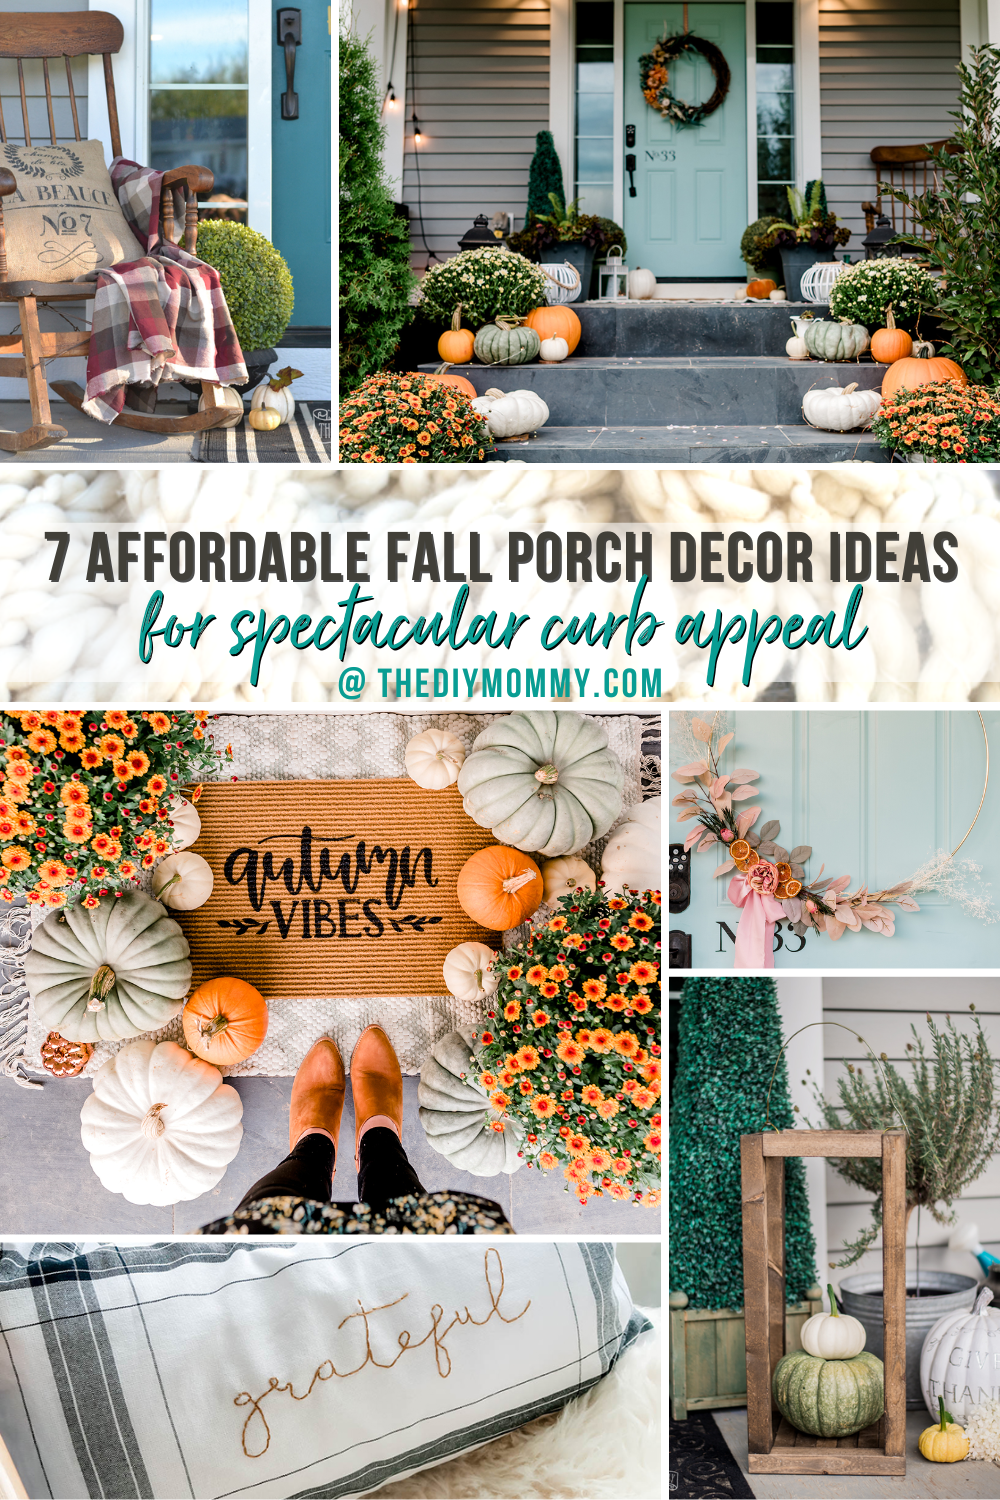 7 Best Fall Front Porch Decorating Ideas on a Budget